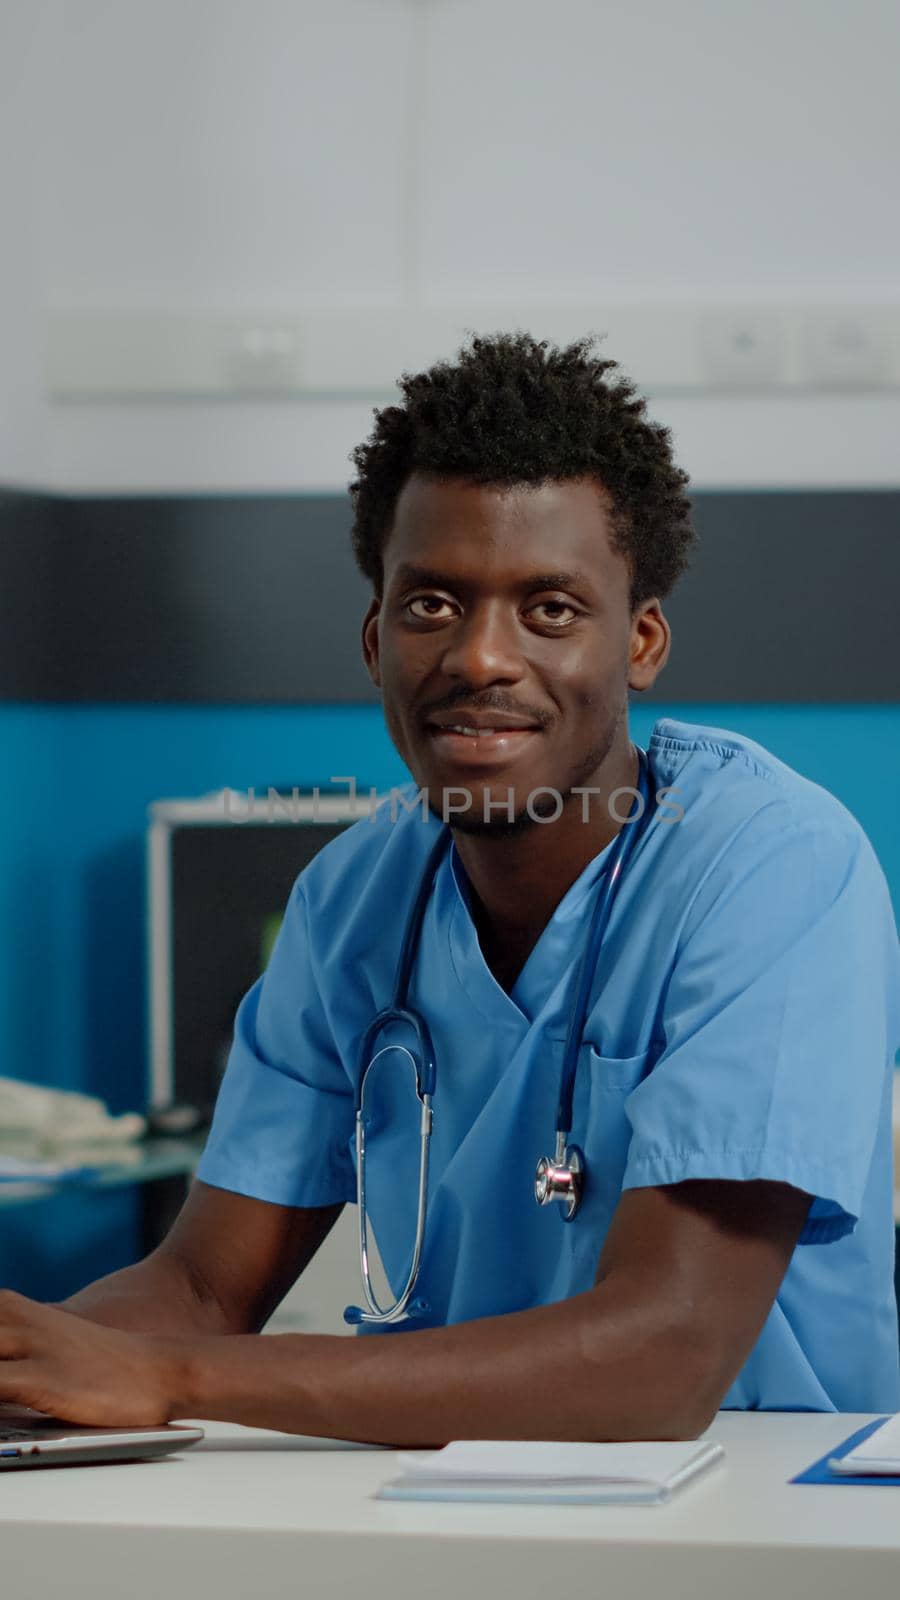 Portrait of male nurse with uniform and stethoscope using laptop on desk sitting in medical cabinet at facility. Healthcare assistant looking at camera, having modern technology